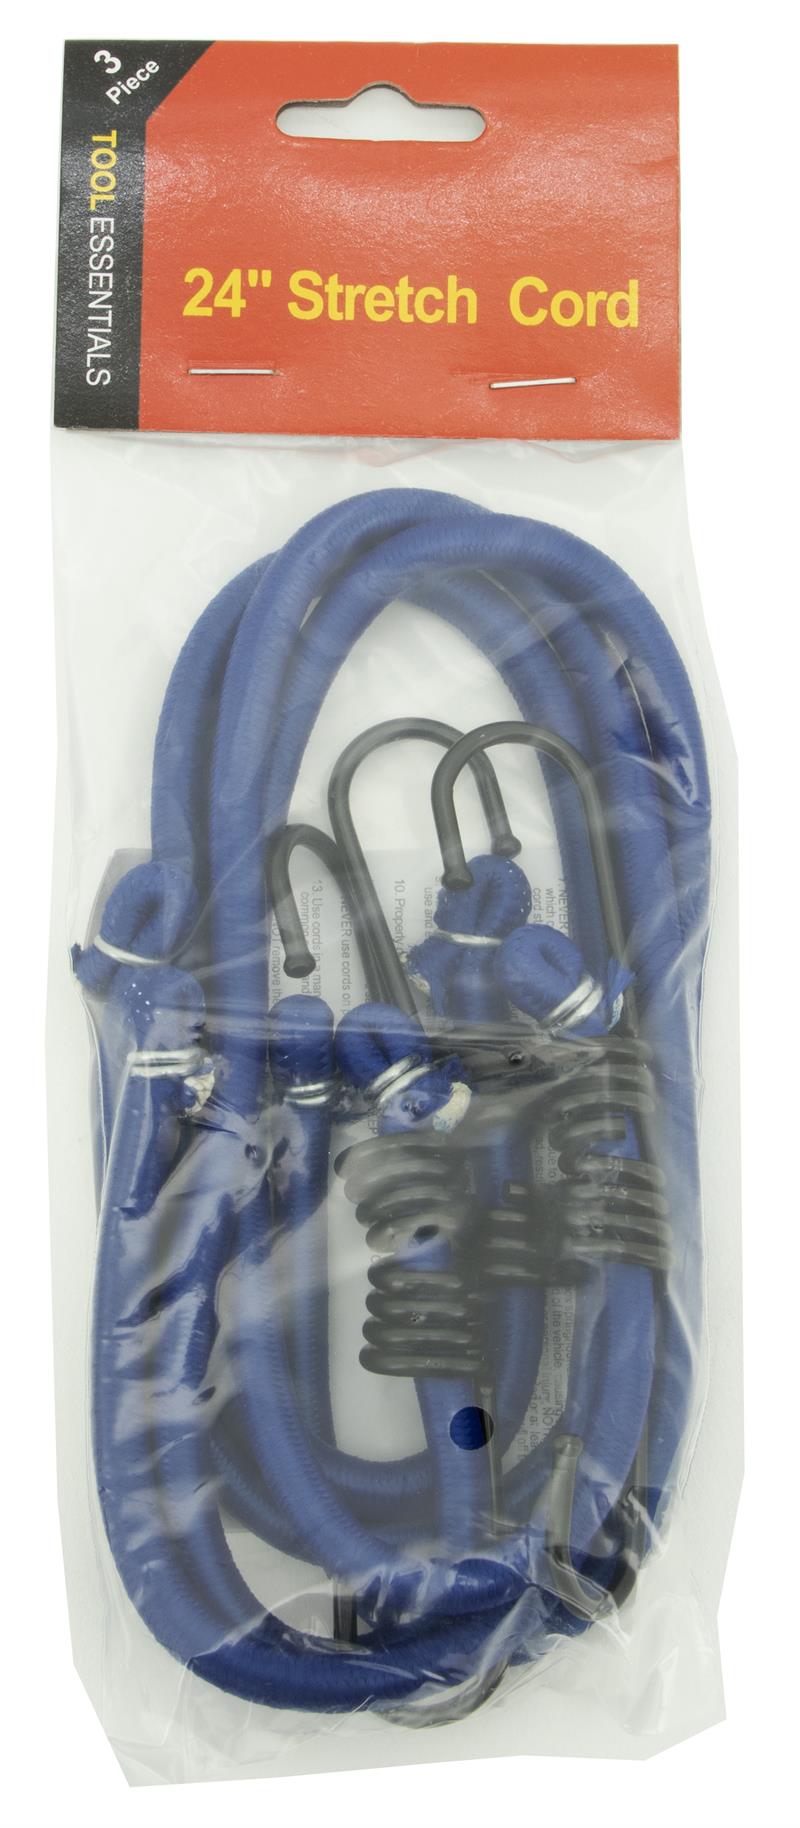 24 Bungee Cord (3-Piece Pack)